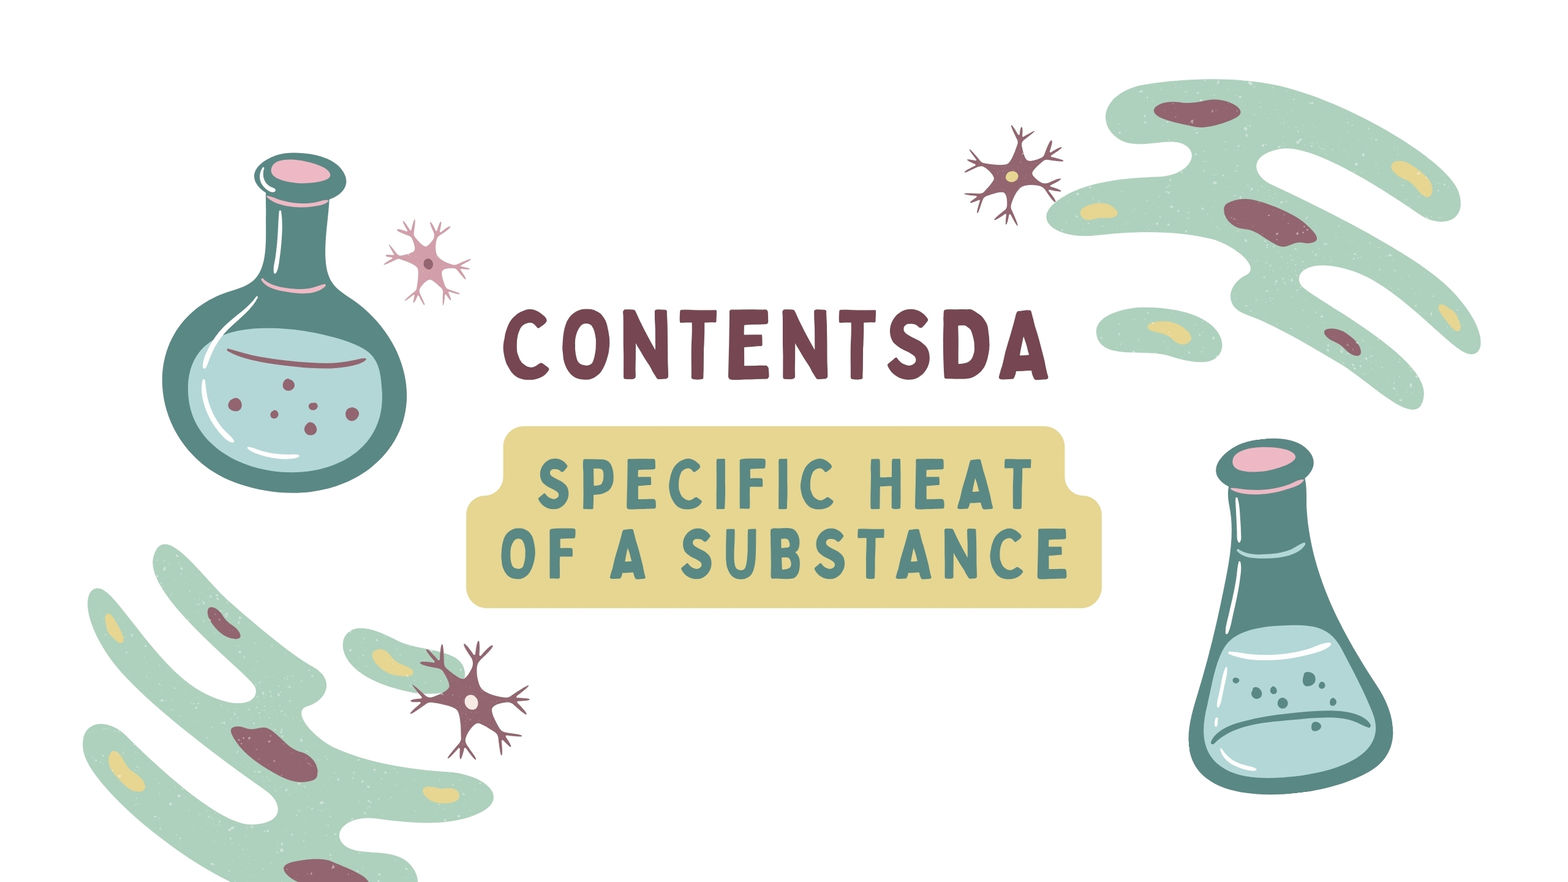 Specific Heat of a Substance - ContentsDa Science Experiment